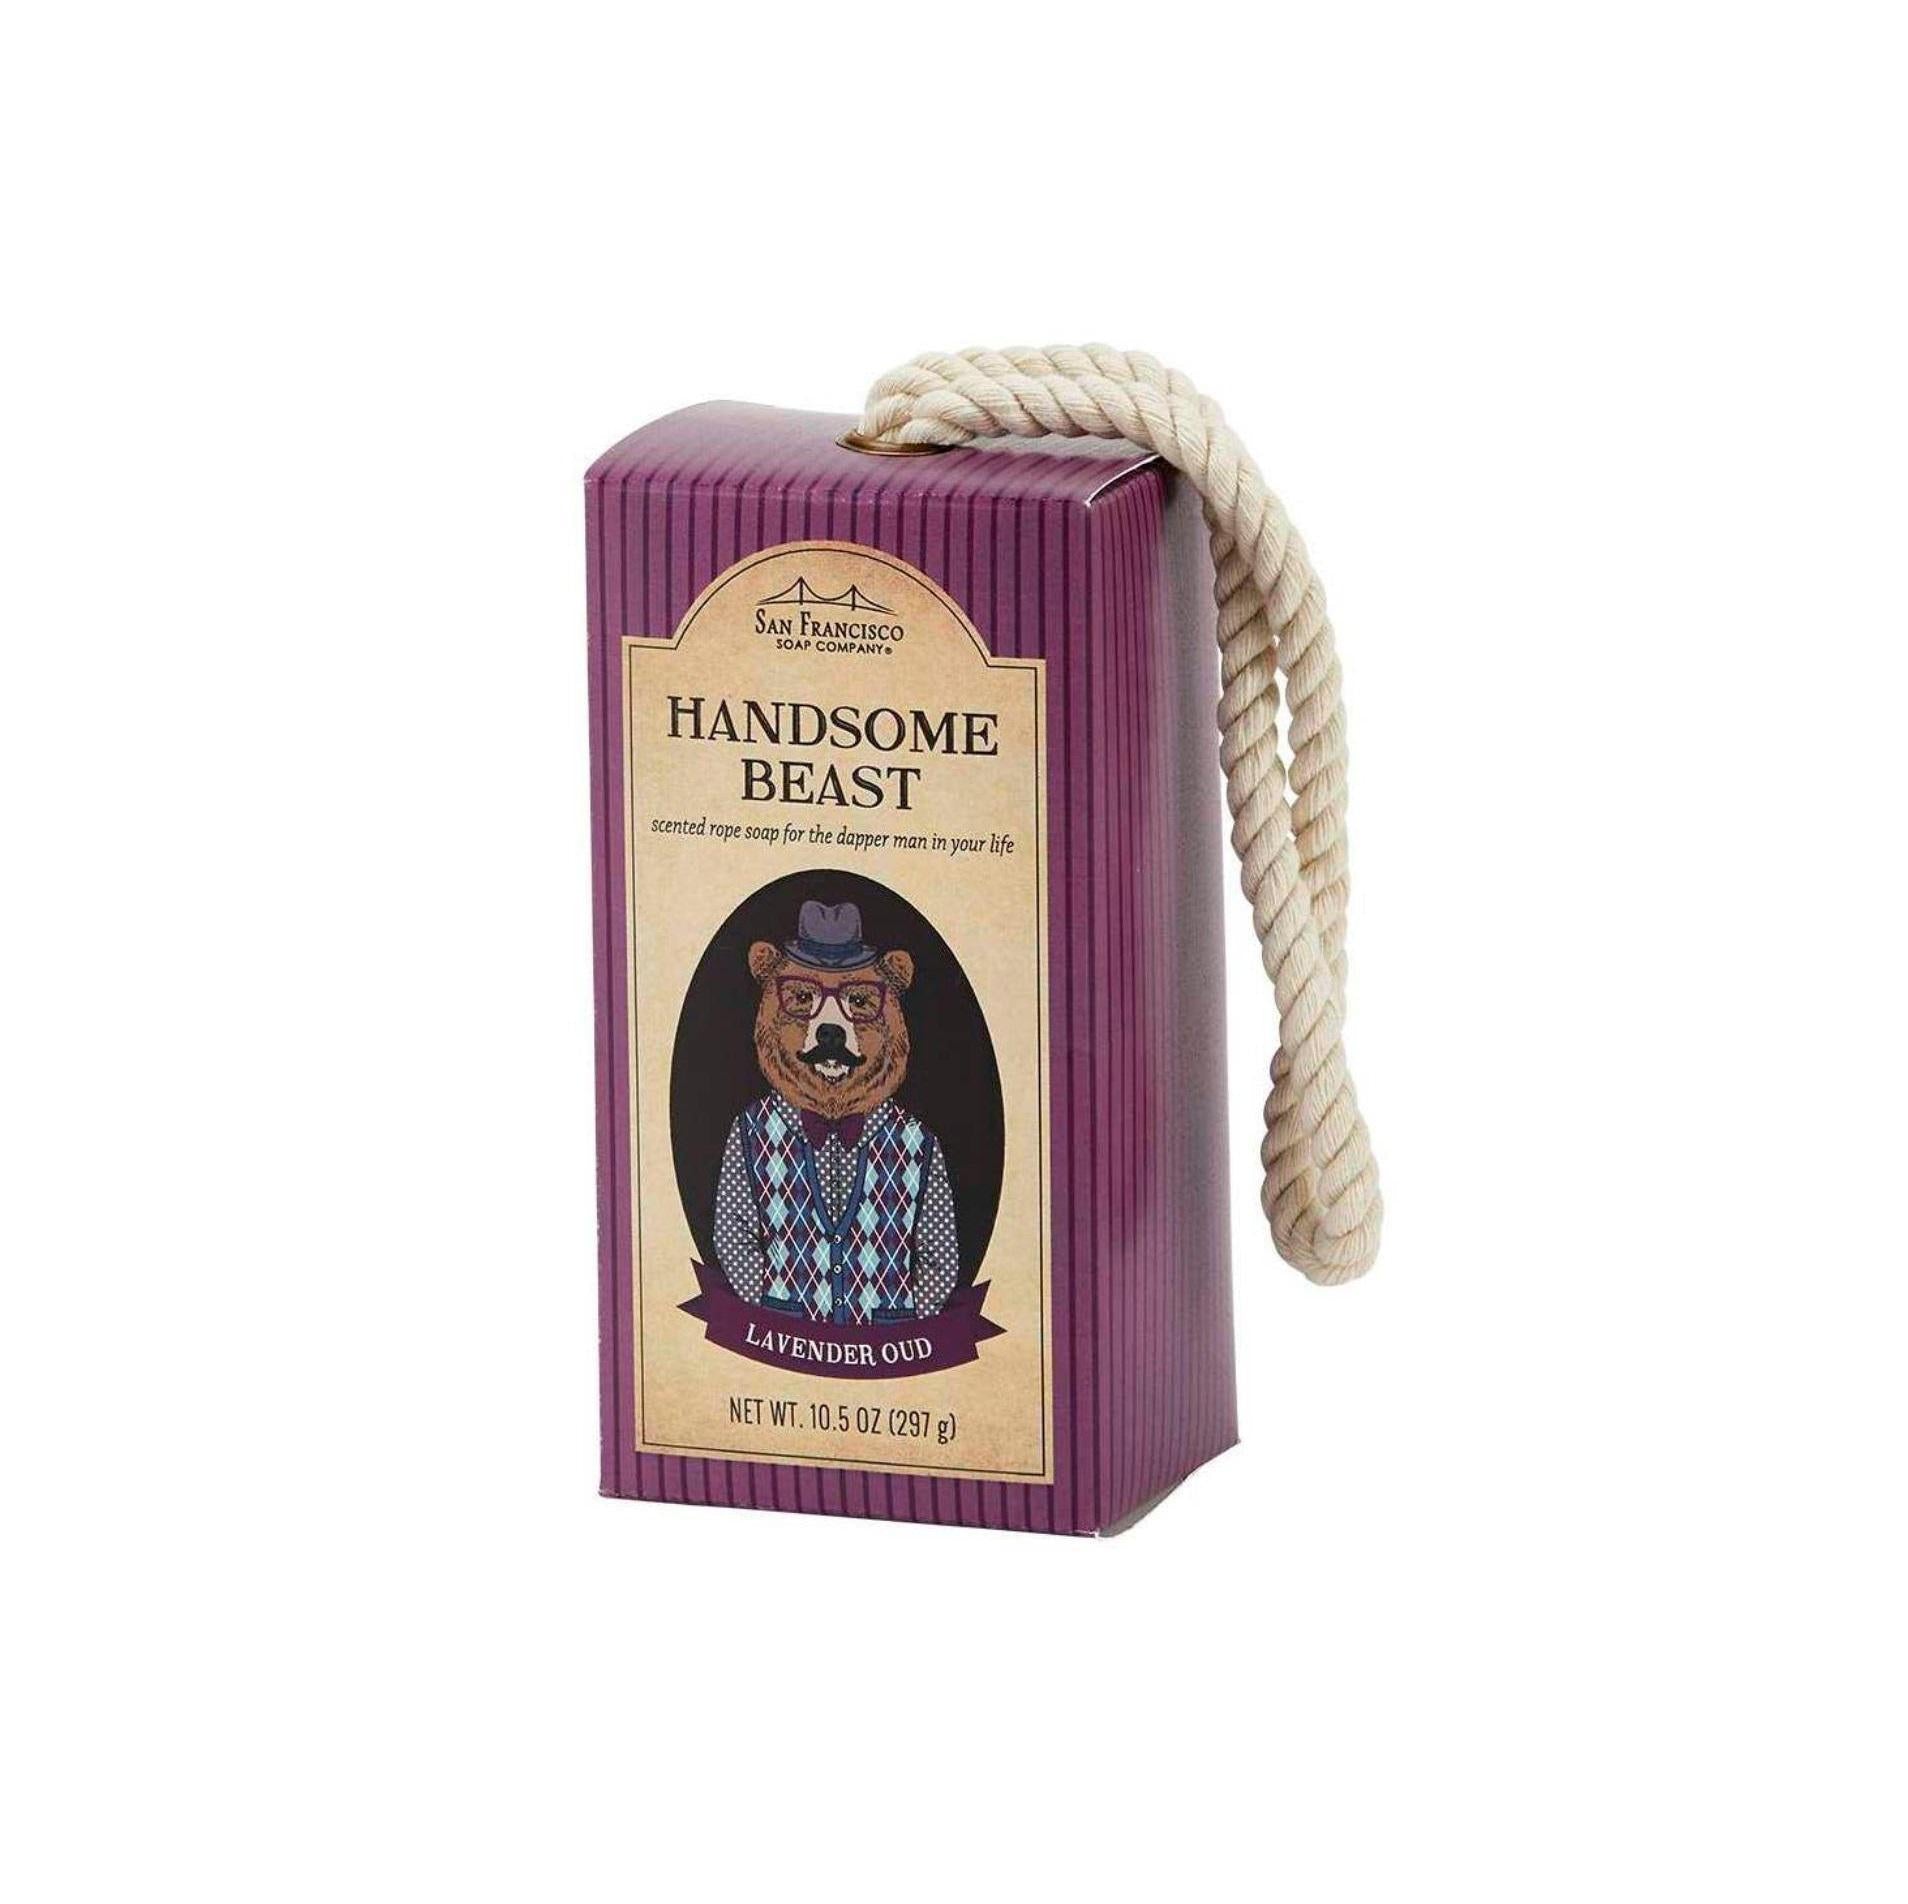 Soap on A Rope | Lavender Oud Handsome Beast